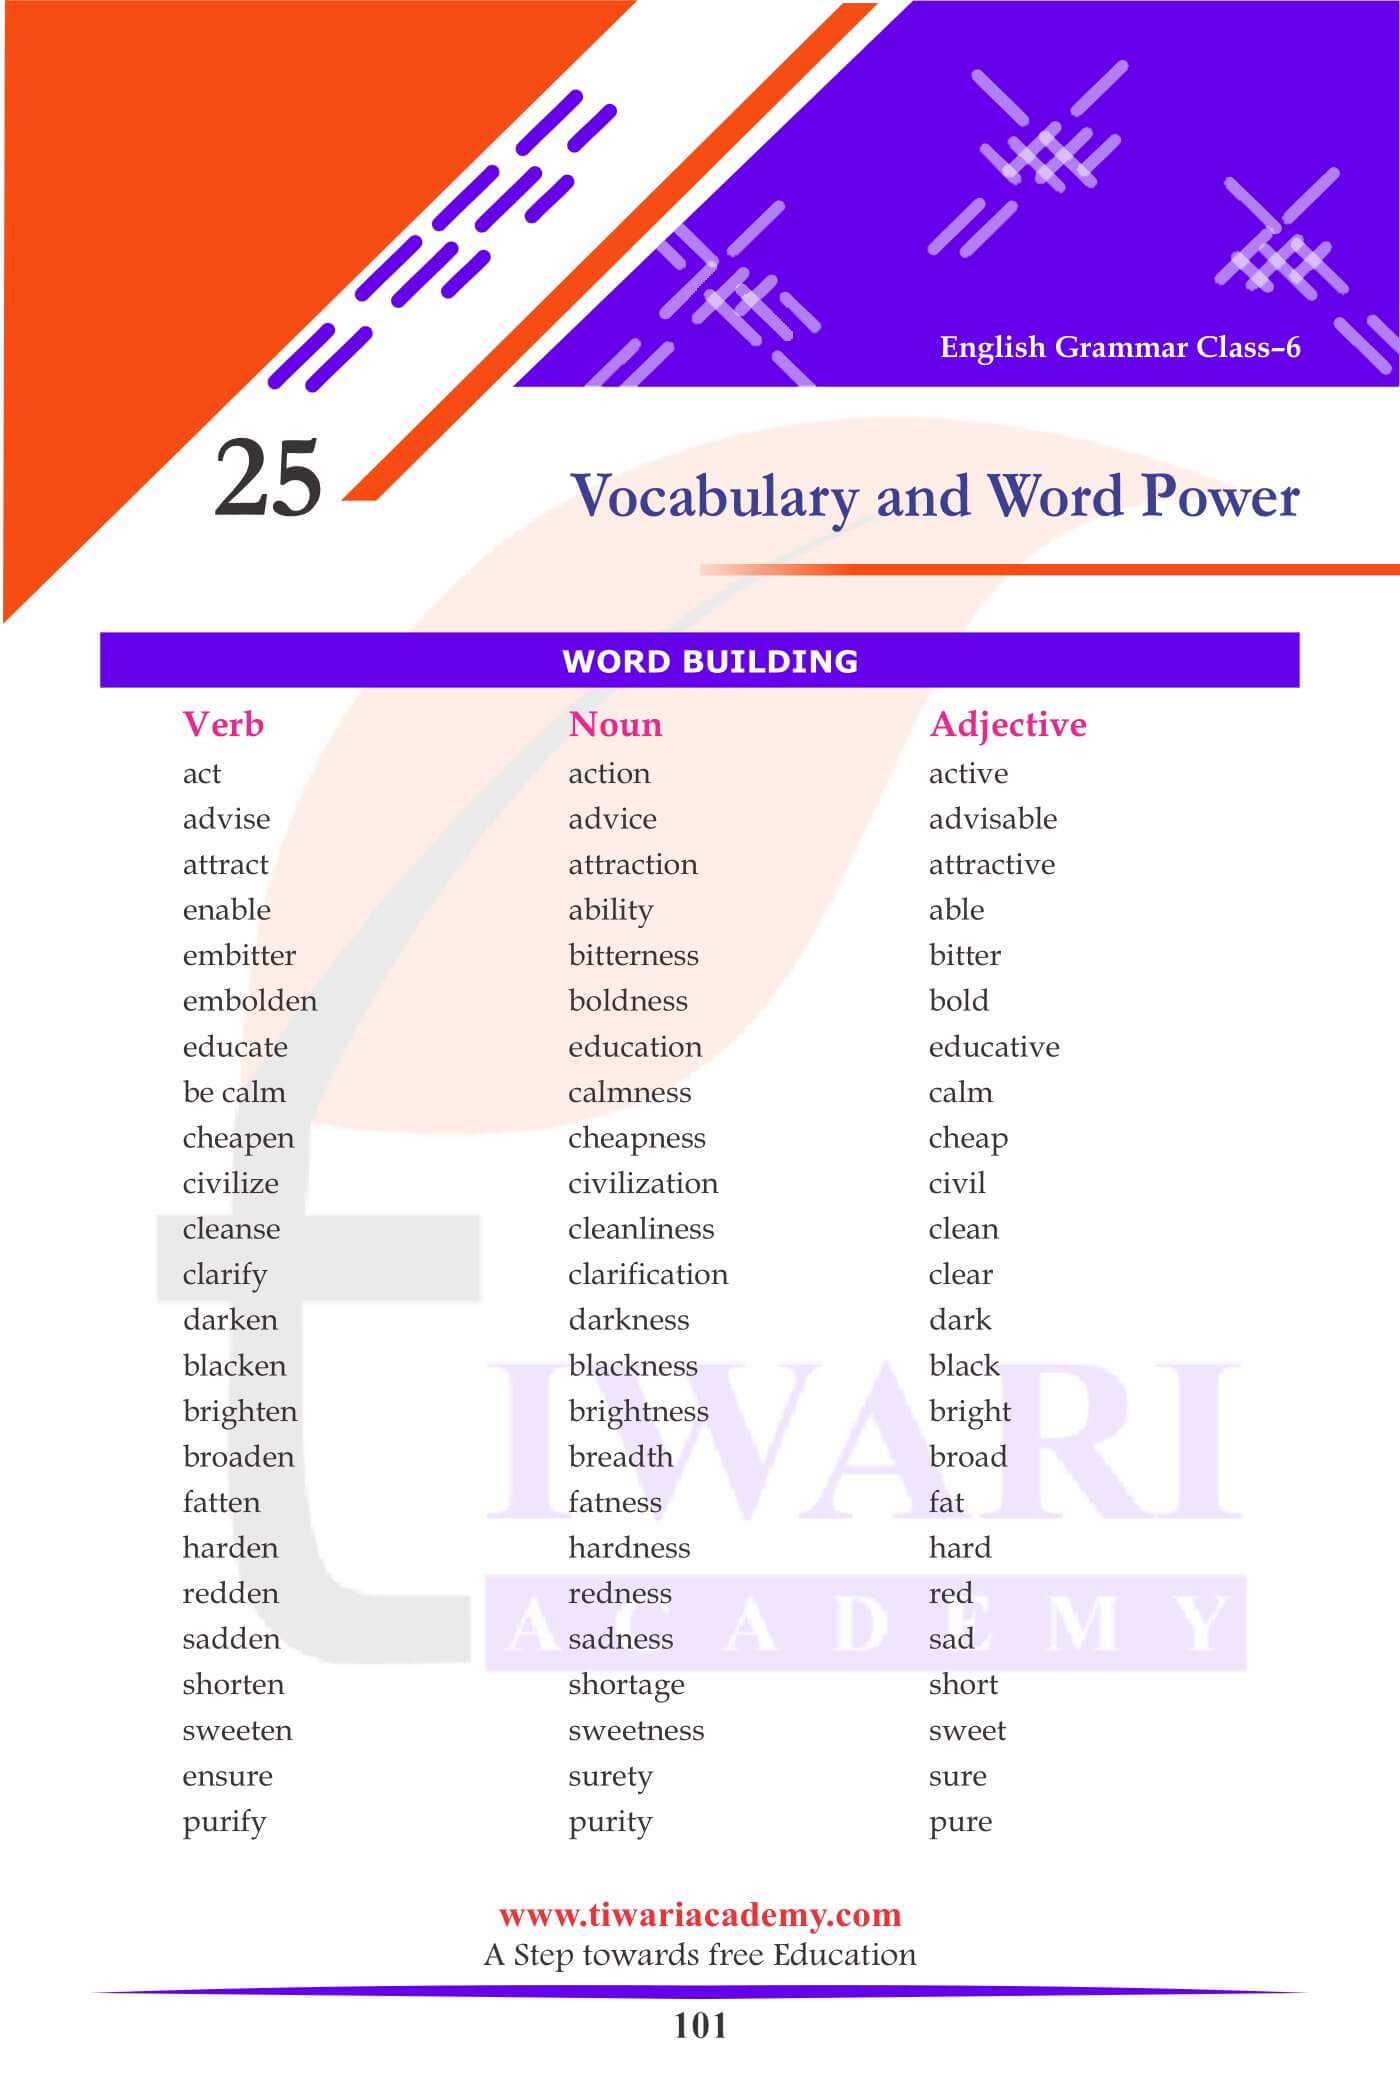 Class 6 English Grammar Chapter 25 Vocabulary and Word Power